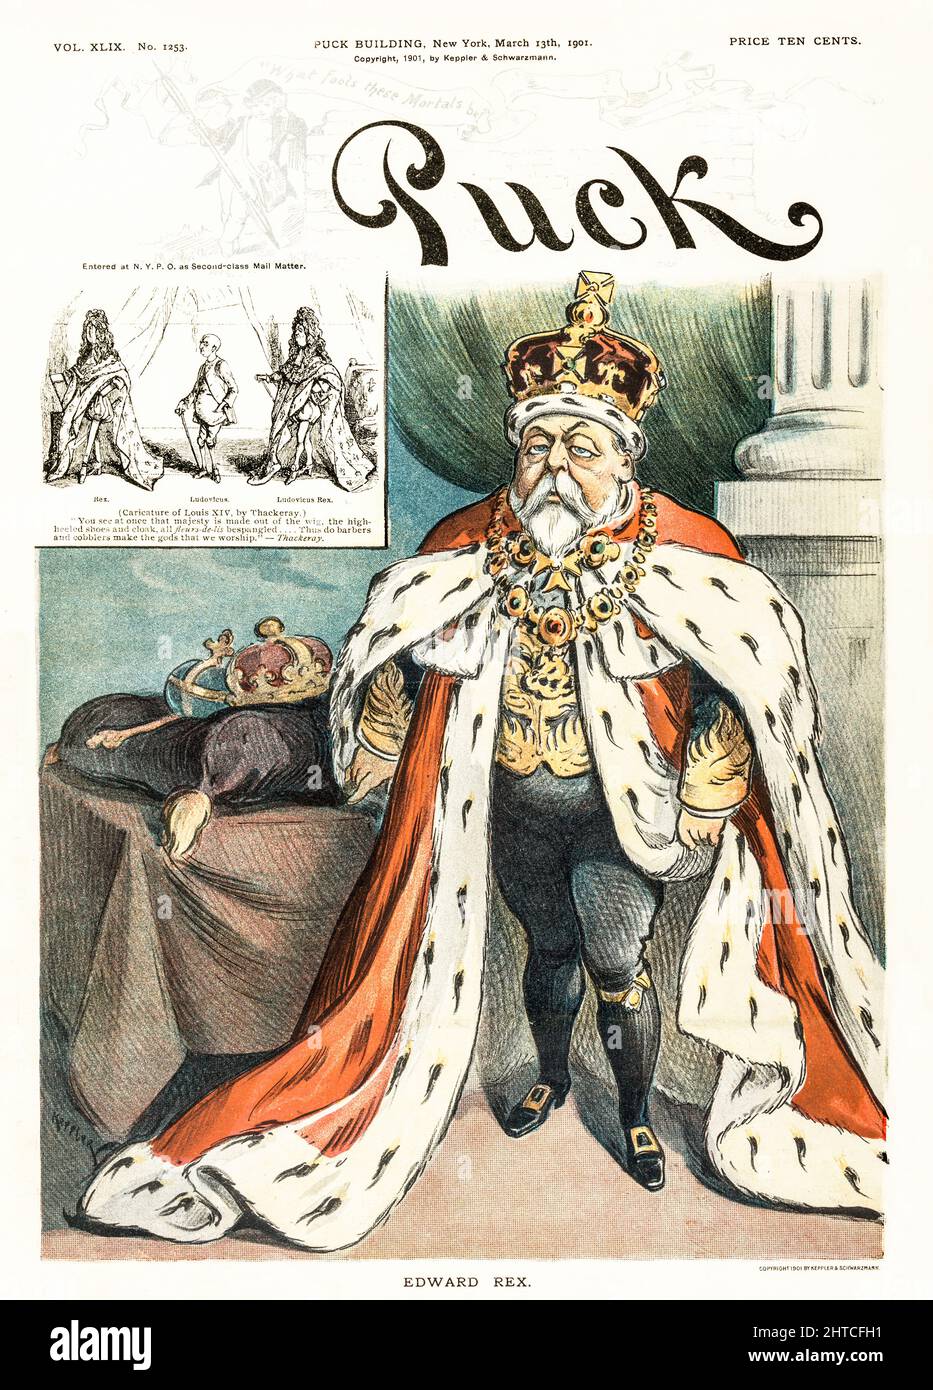 An early 20th century American Puck Magazine illustration of Edward VII, King of Great Britain, shortly after taking the throne. An inset shows a caricature of Louis XIV, by with a quote by the British Author, William Makepeace Thackeray..'You see at once that majesty is made out of the wig, the high-heeled shoes and cloak, all fleurs-de-lis bespangled....Thus do barbers and cobblers make the gods that we worship.' Stock Photo